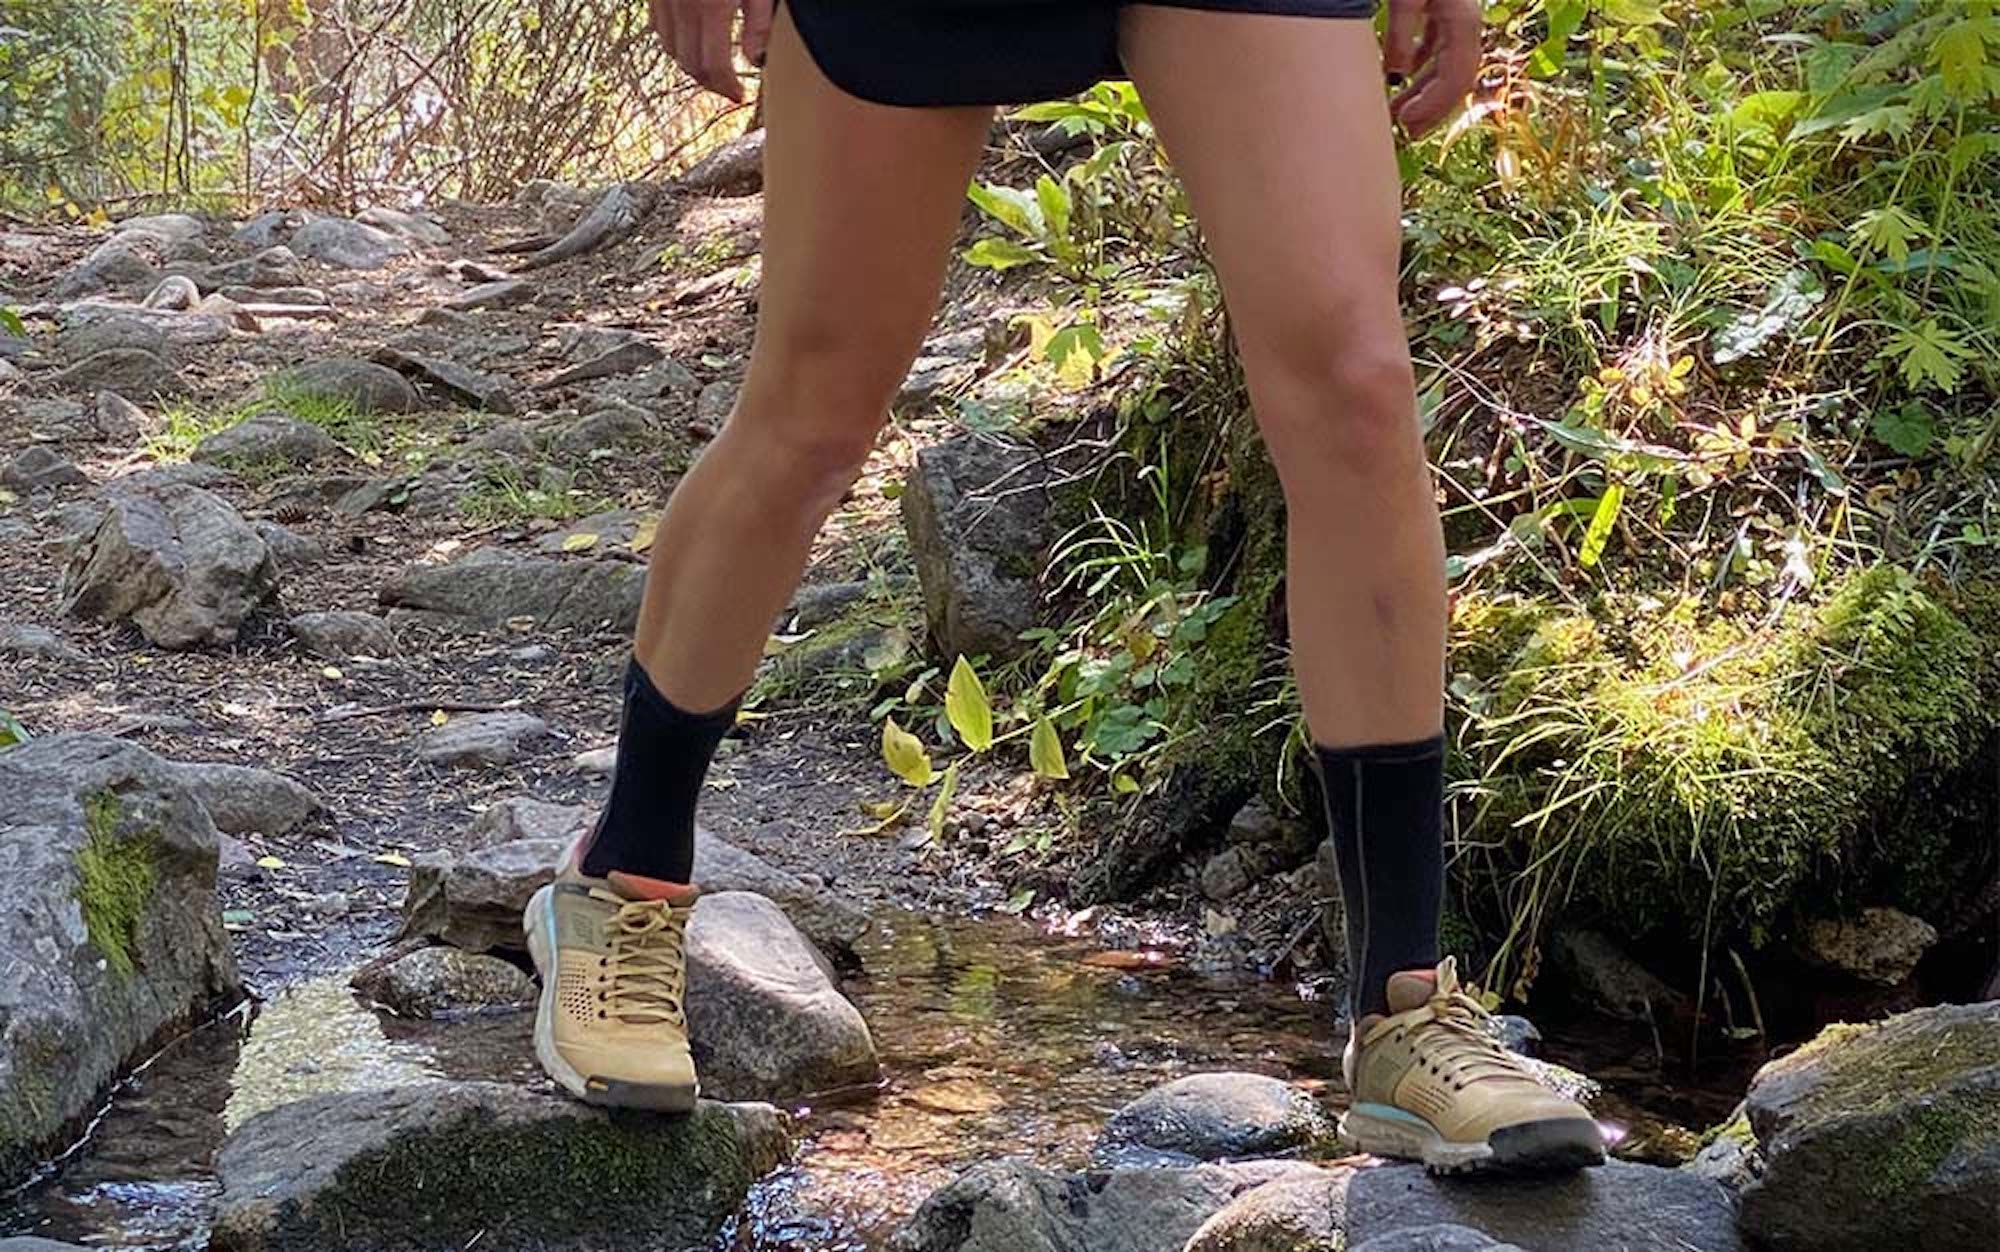 A woman’s legs crossing a stream wearing yellow low hiking shoes.